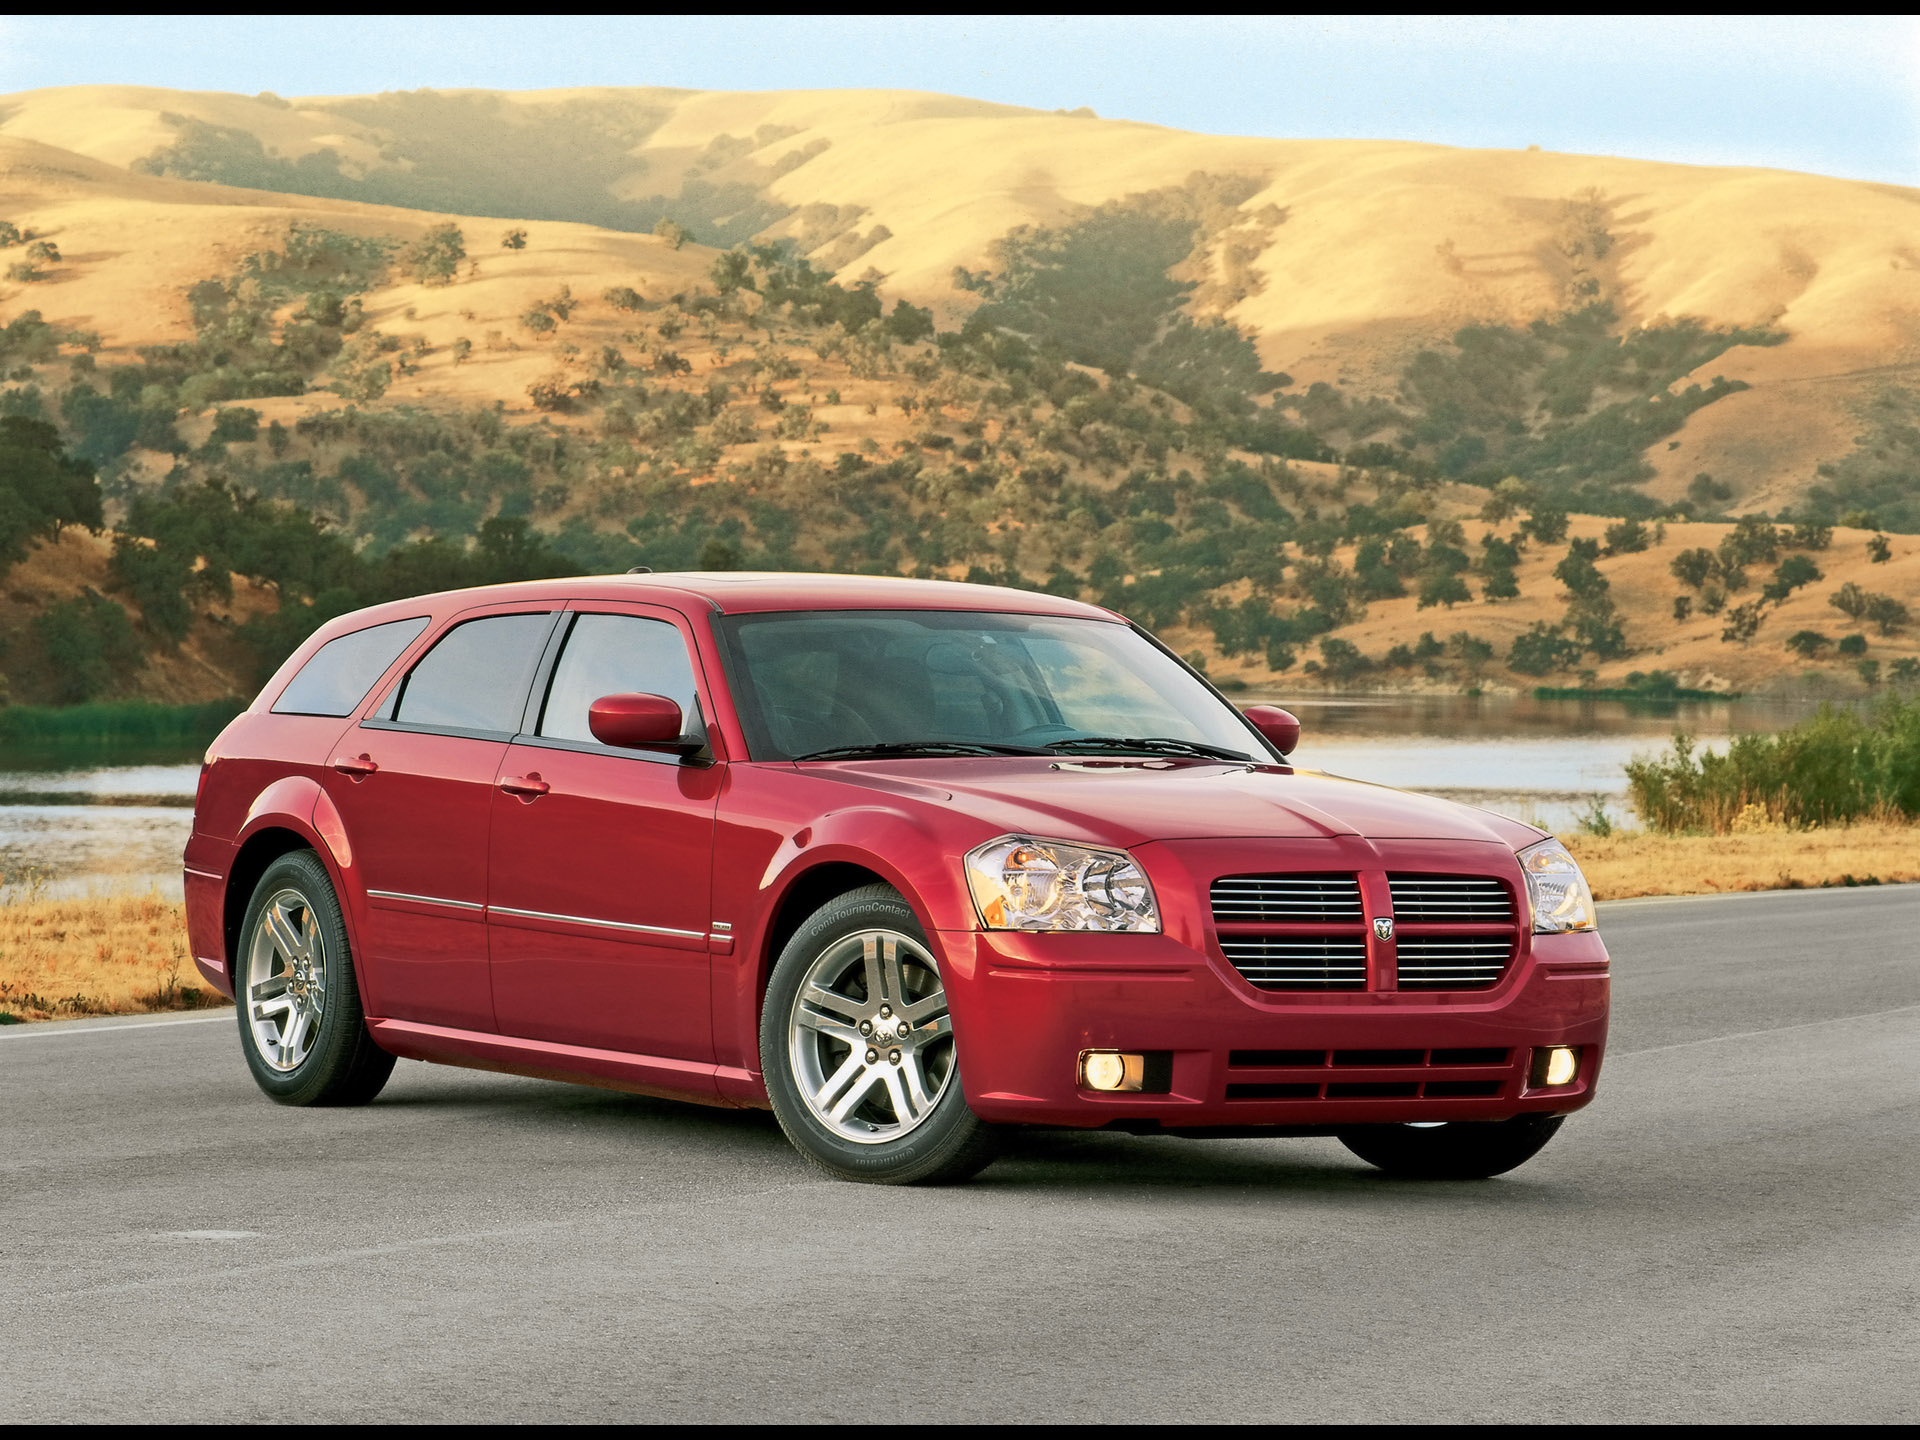 2005 Dodge Magnum RT - Front Angle - 1920x1440 Wallpaper